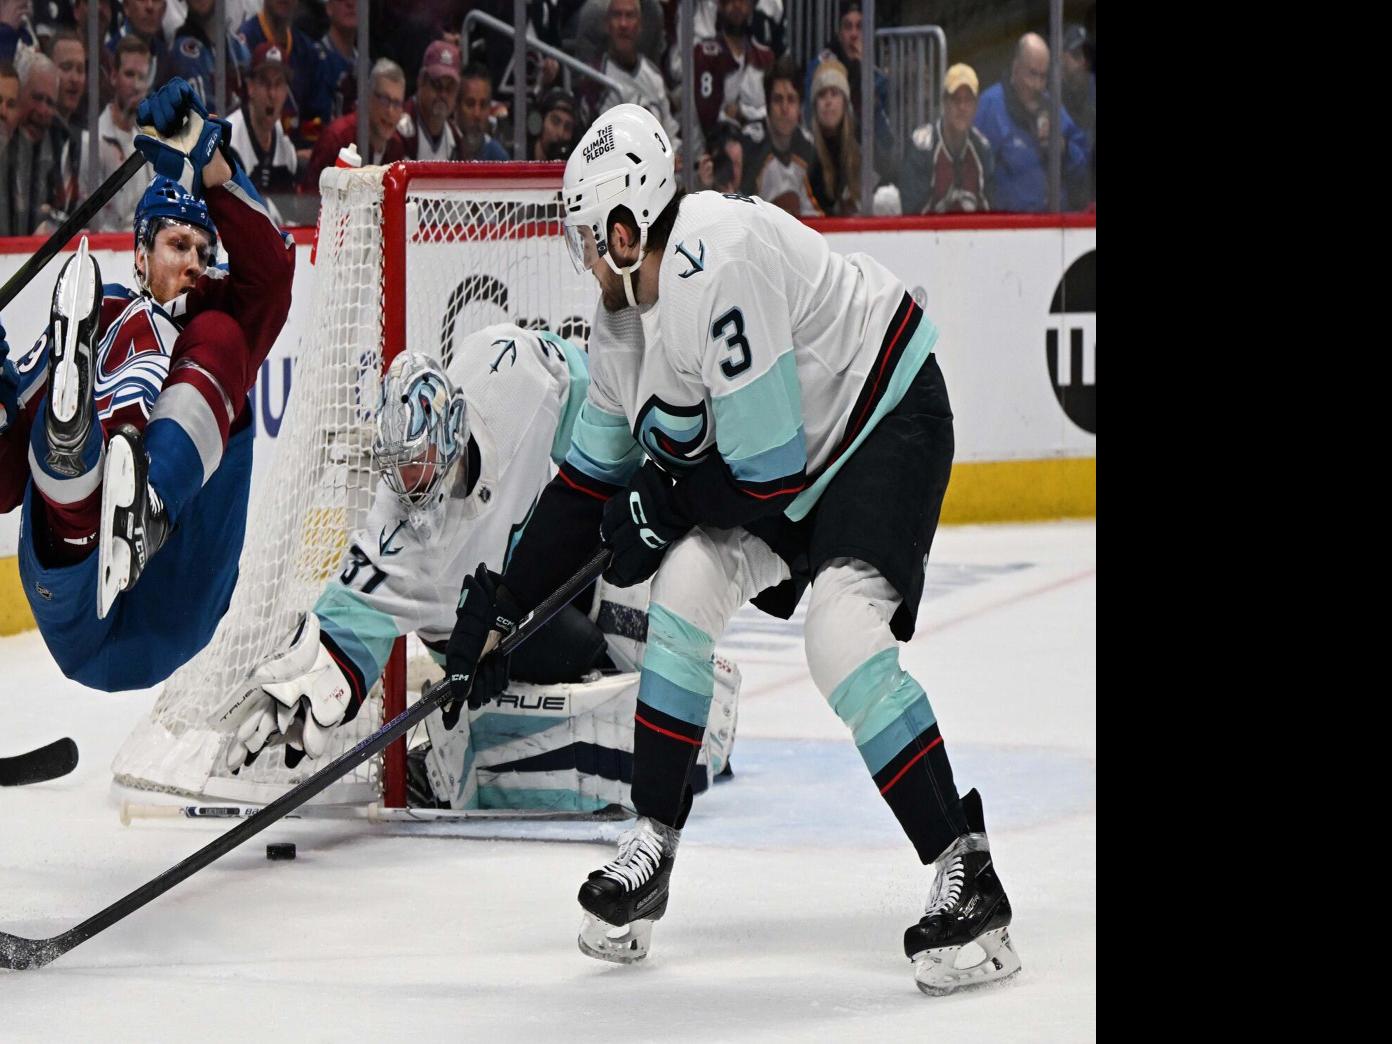 Stanley Cup Final-bound Avalanche is 12-2 in postseason (7-0 on the road)  with eight comeback wins. They're all club records – Greeley Tribune